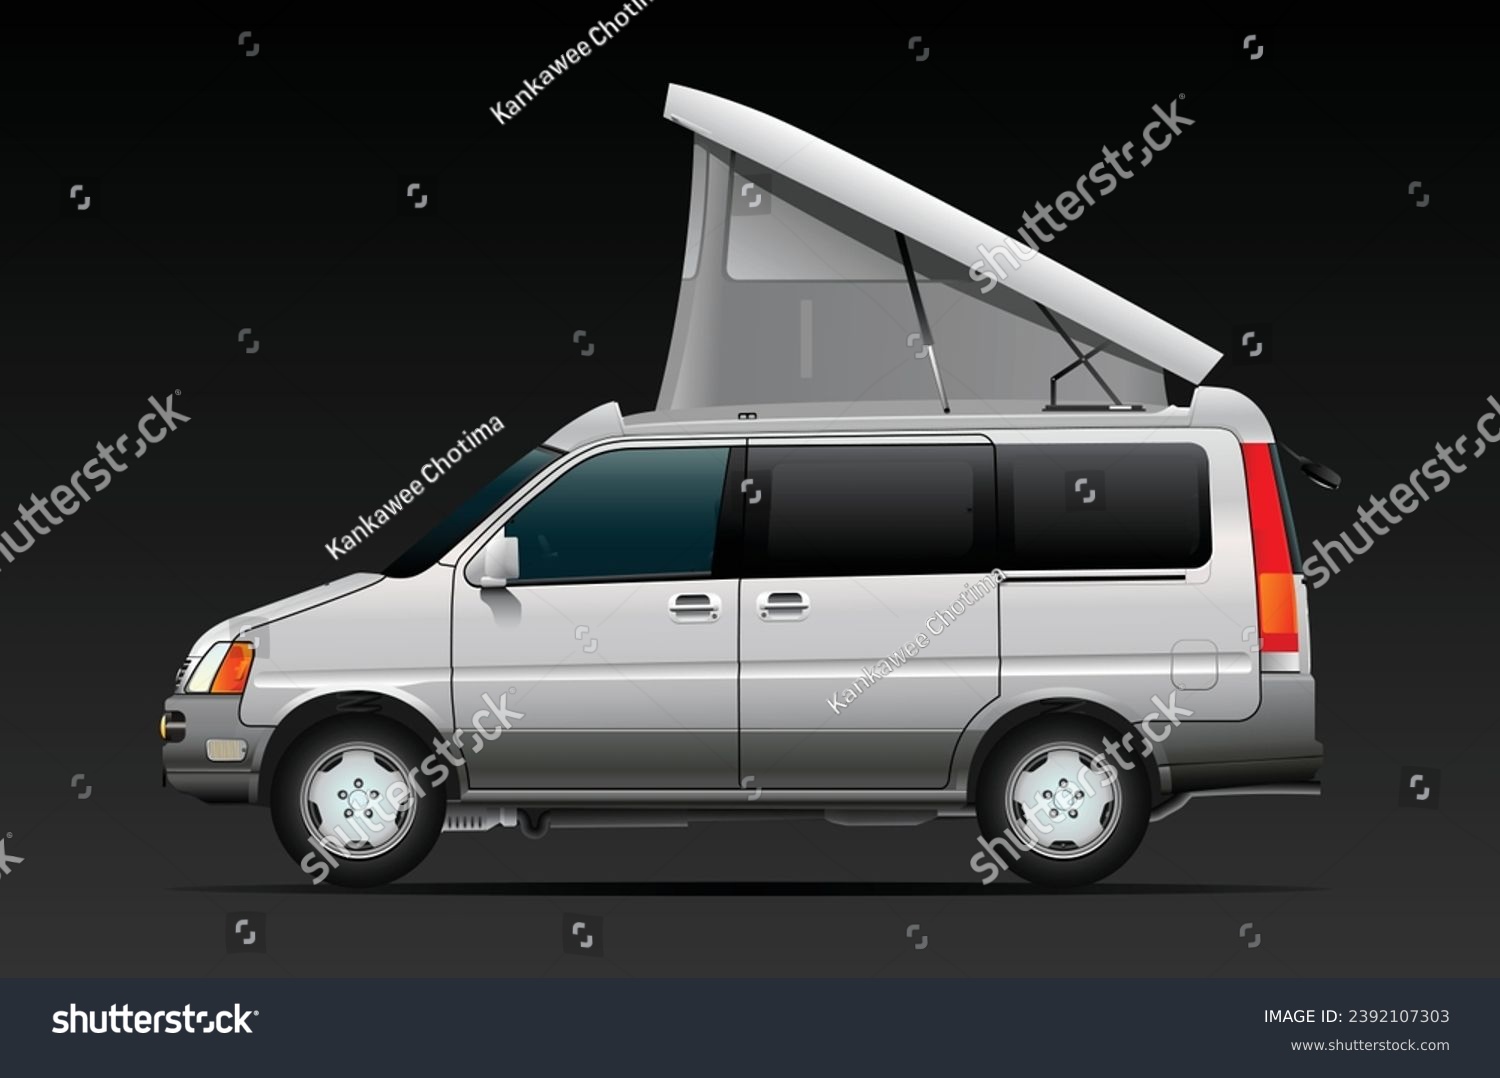 SVG of Realistic 90's era silver Japanese specification minivan with 90's automotive technologies and built in roof popup tent in dark gradient background illustration vector. svg